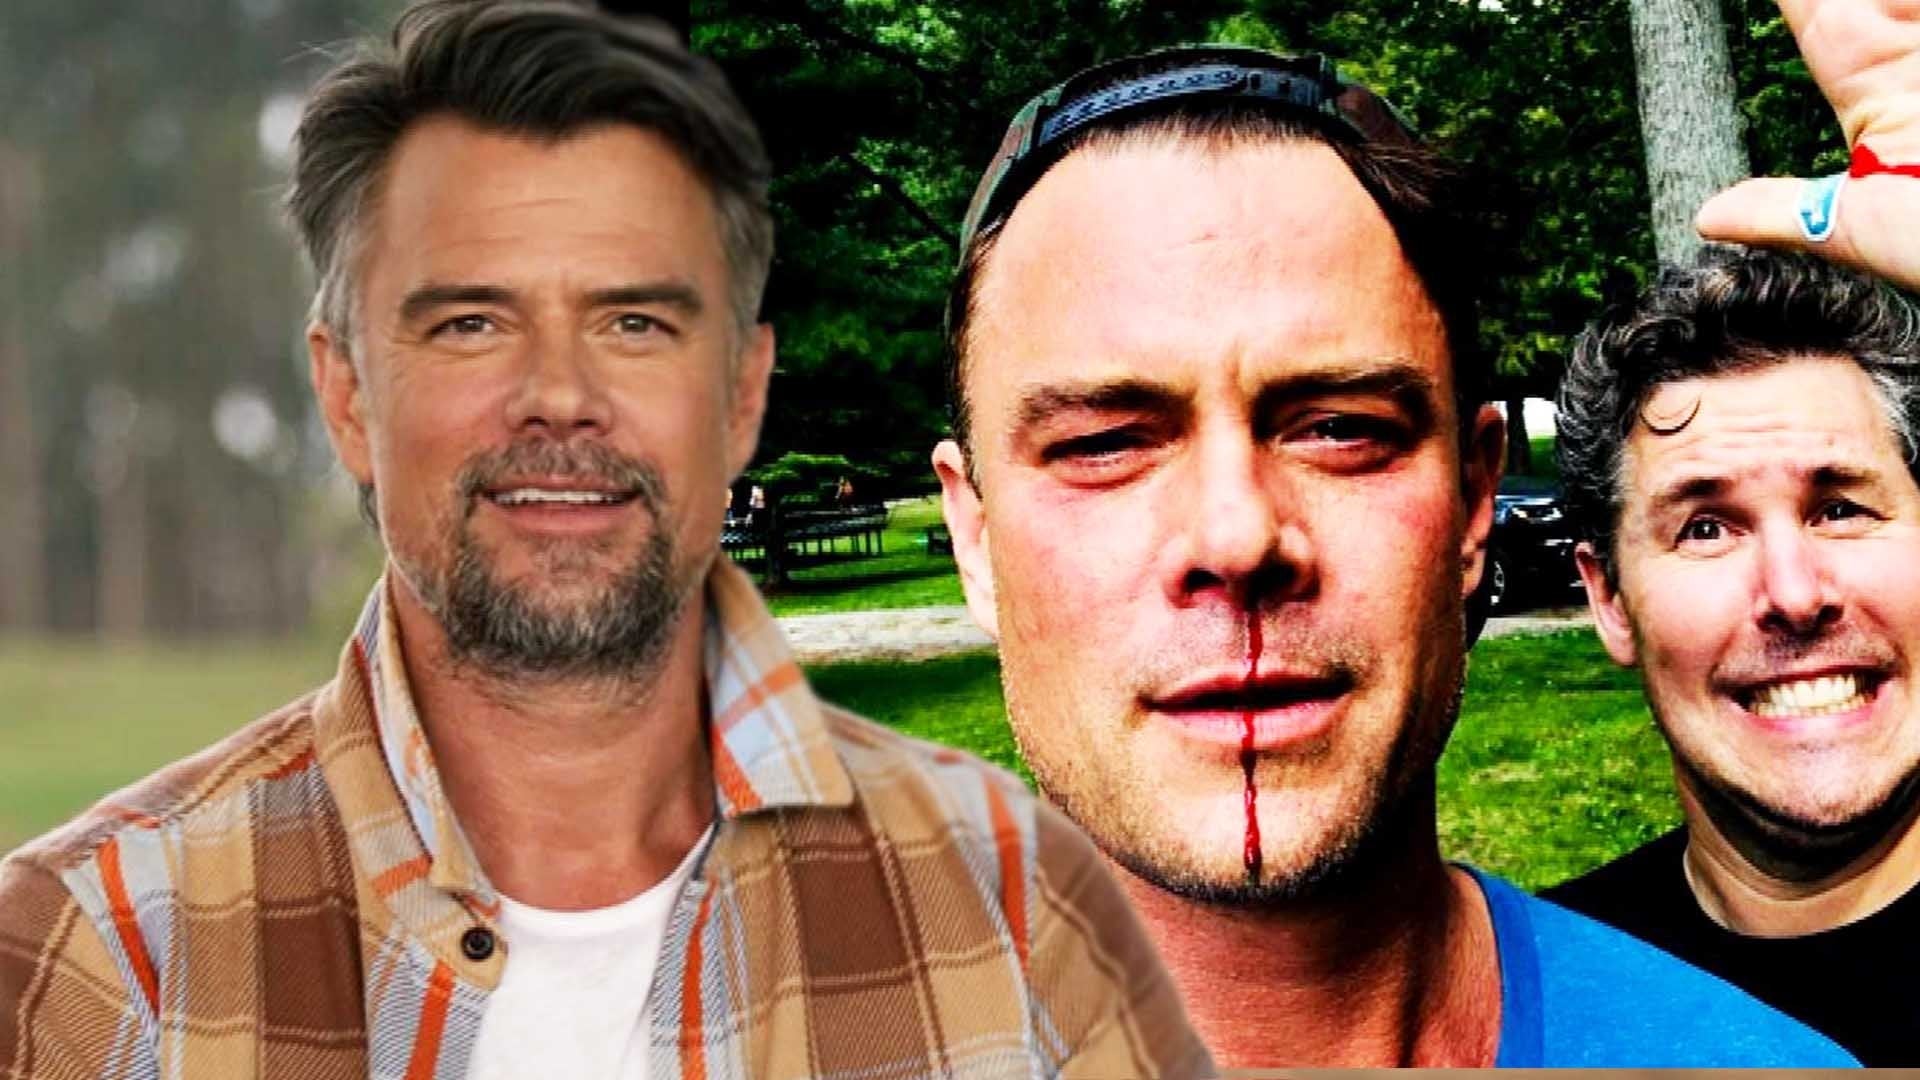 'Buddy Games': How Josh Duhamel’s Real Life Inspired New Competition (Exclusive)